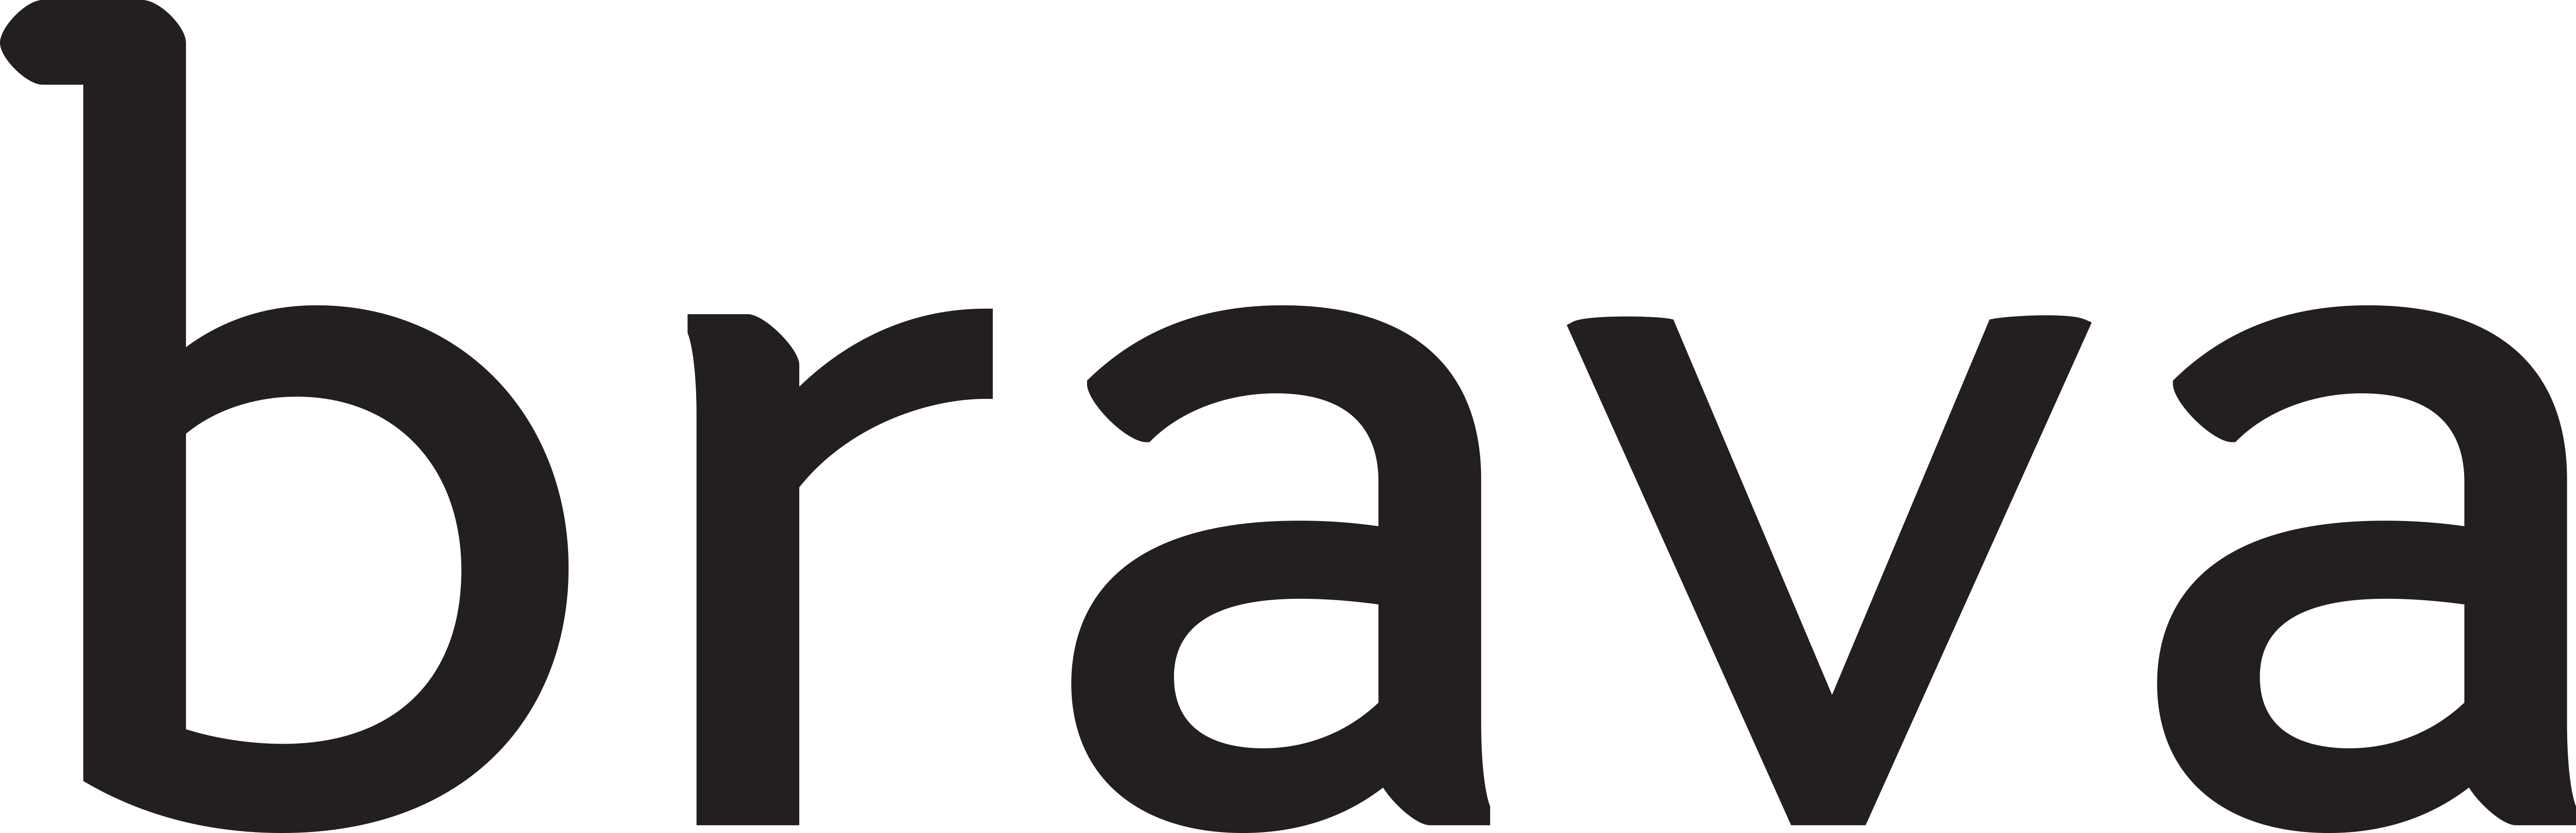 Logo for Brava - features the text "brava" in black color with a white background.